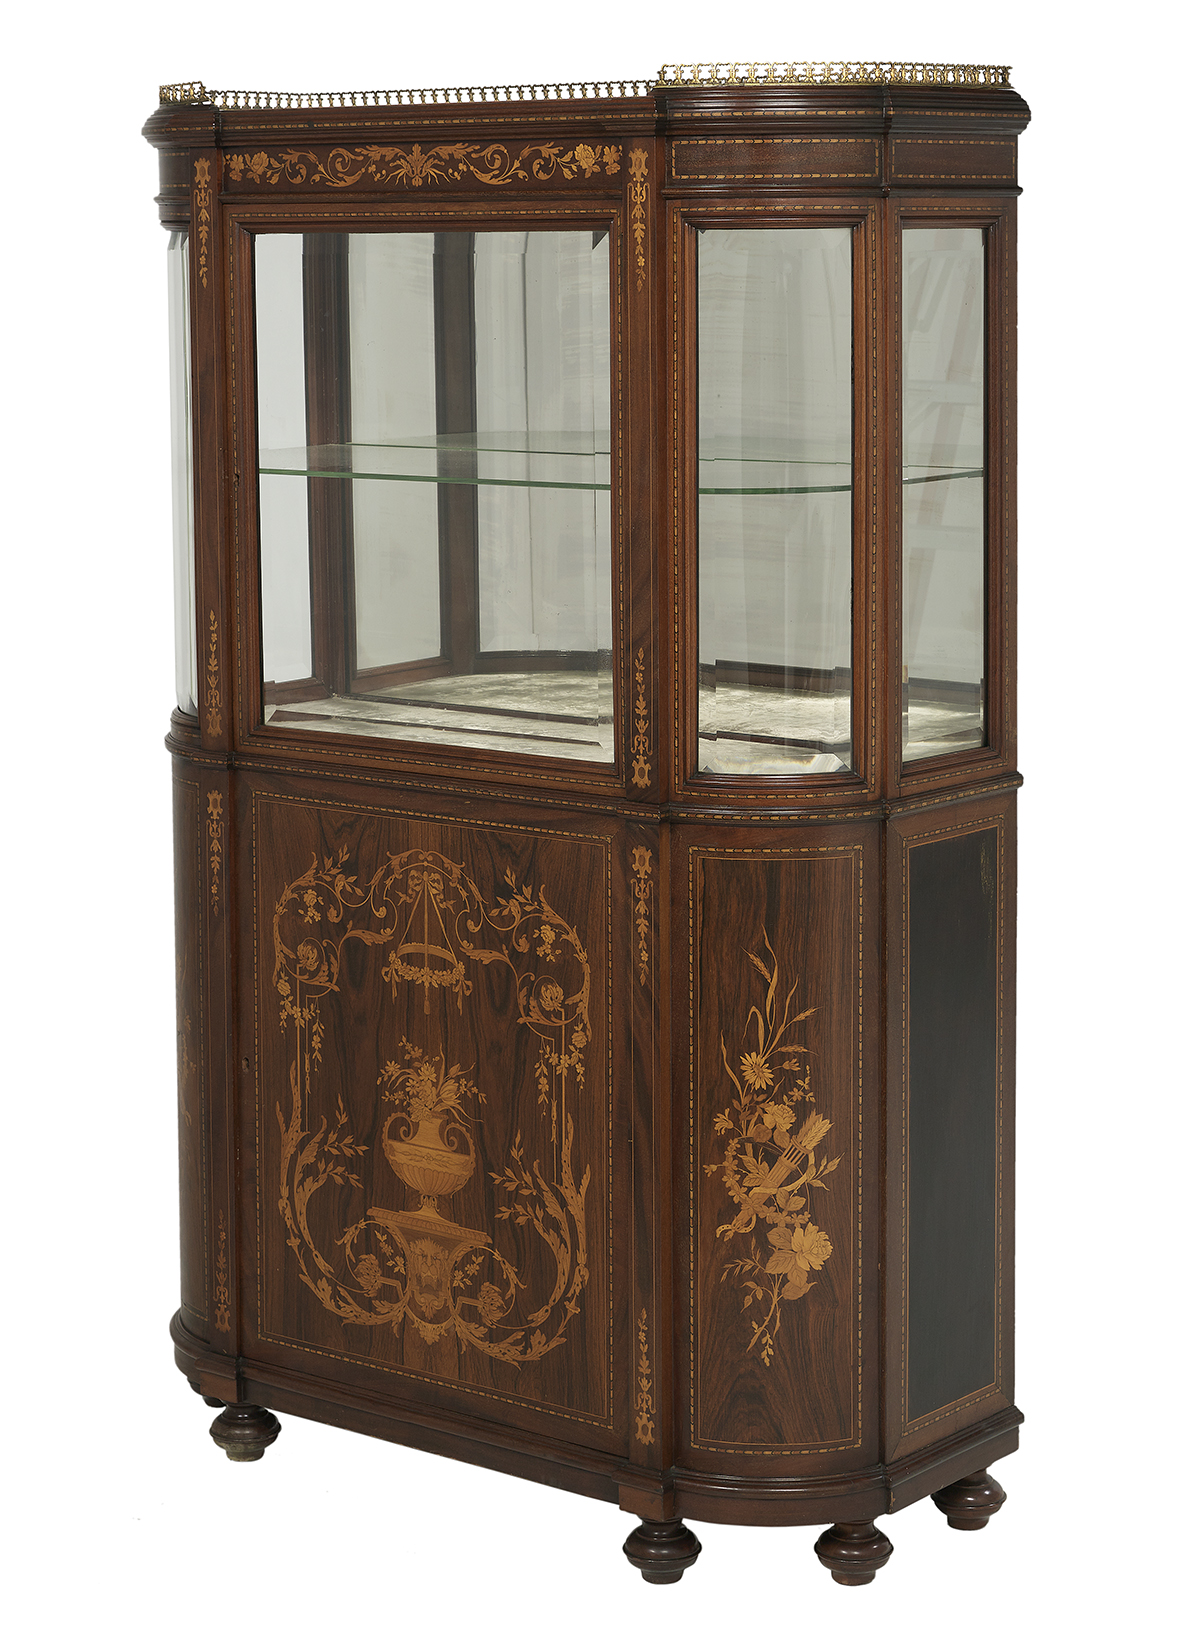 American Late Victorian Rosewood Vitrine - Image 2 of 4